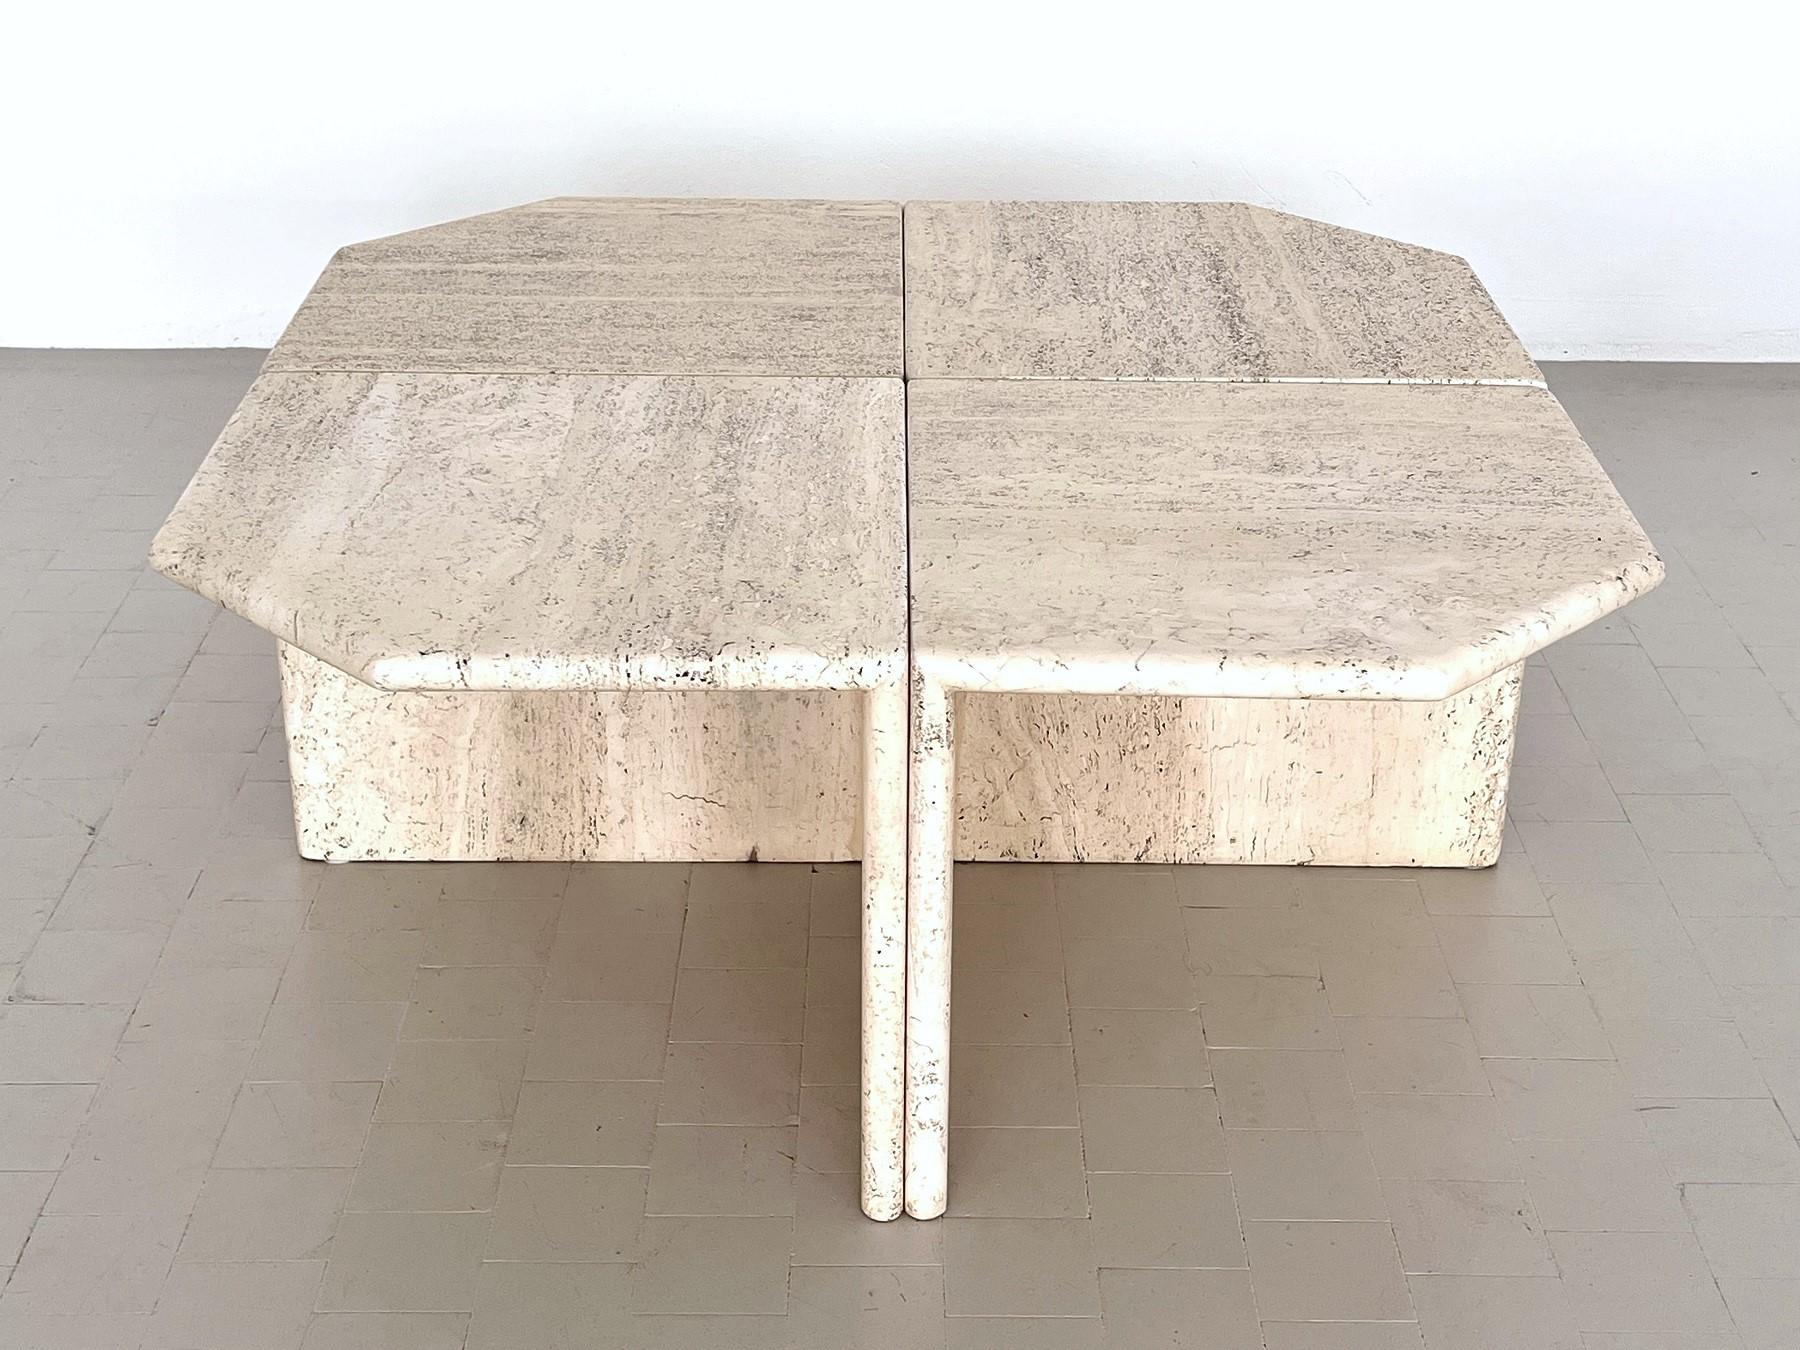 Important and beautiful vintage sectional coffee table made in Italy of thick Italian Travertine Marble during the 1970s.
The complete table consists of four equal parts, which put together makes a sectional coffee table with 100 cm (39,5inch)